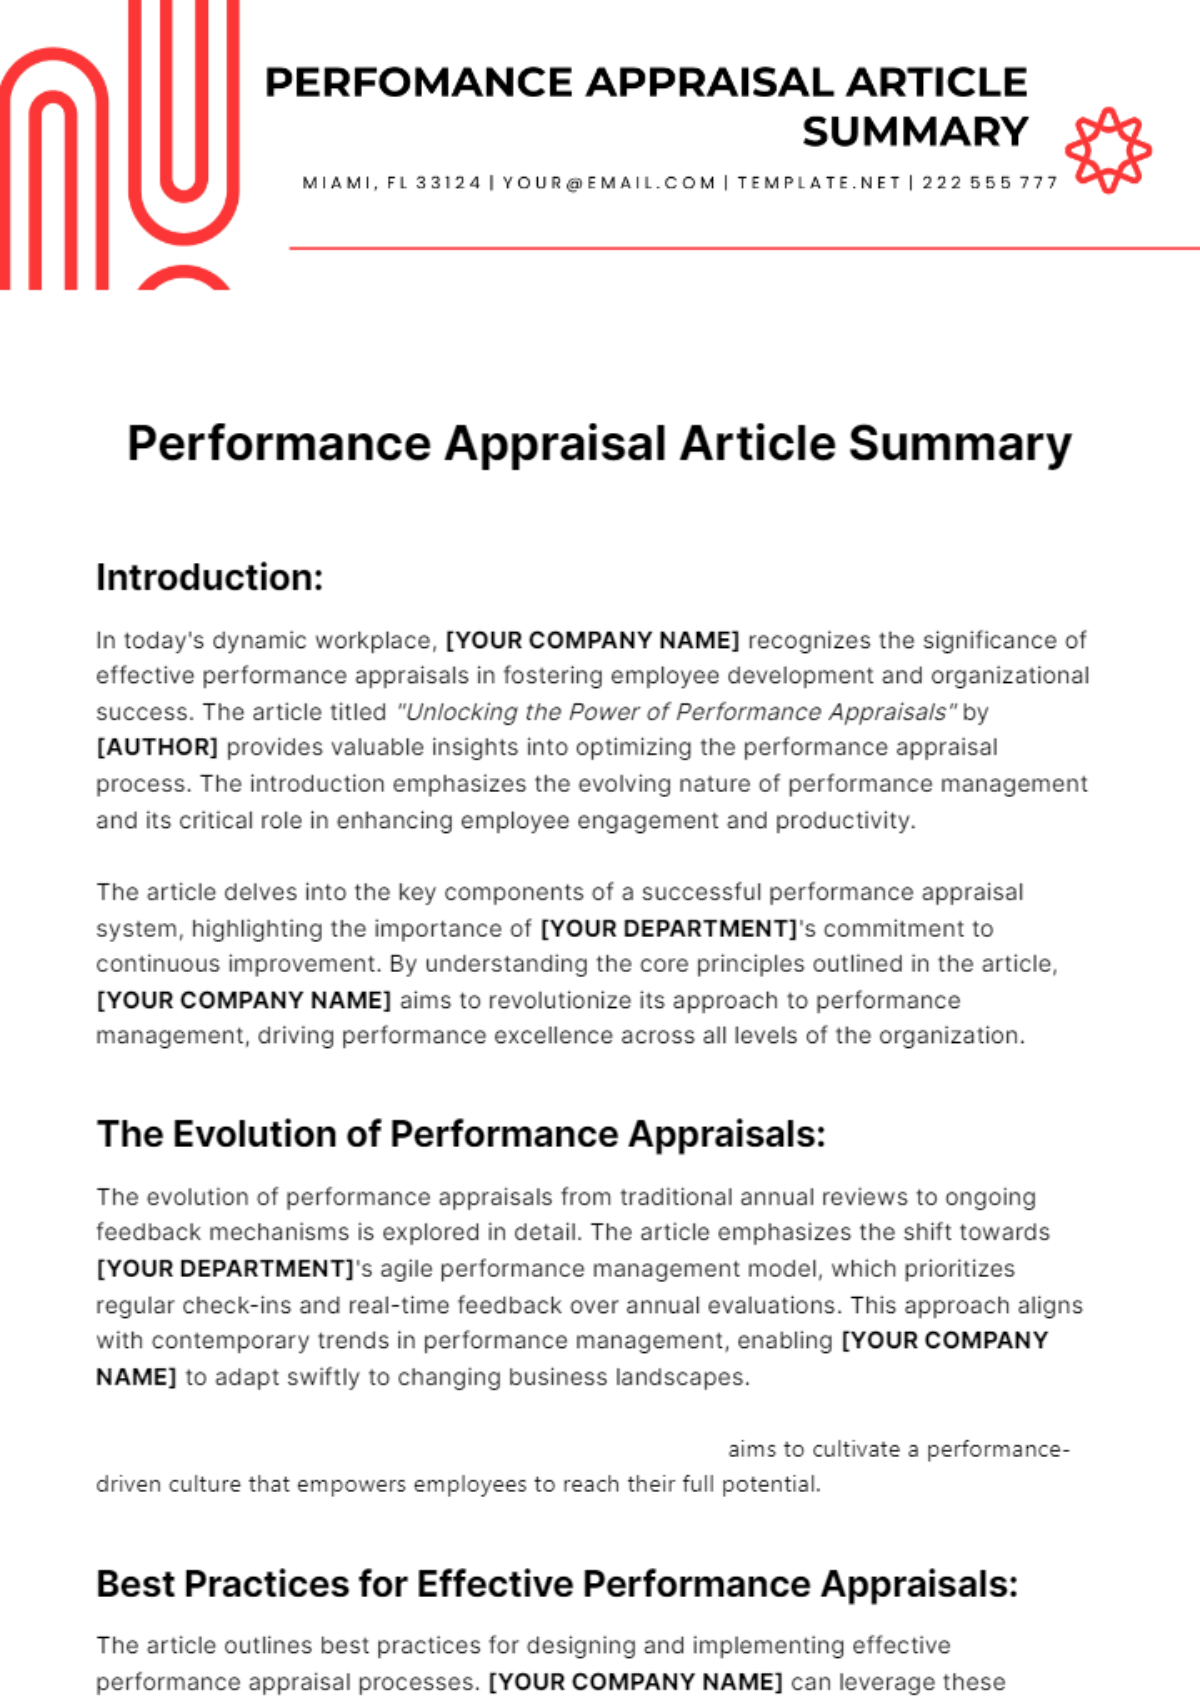 Performance Appraisal Article Summary Template